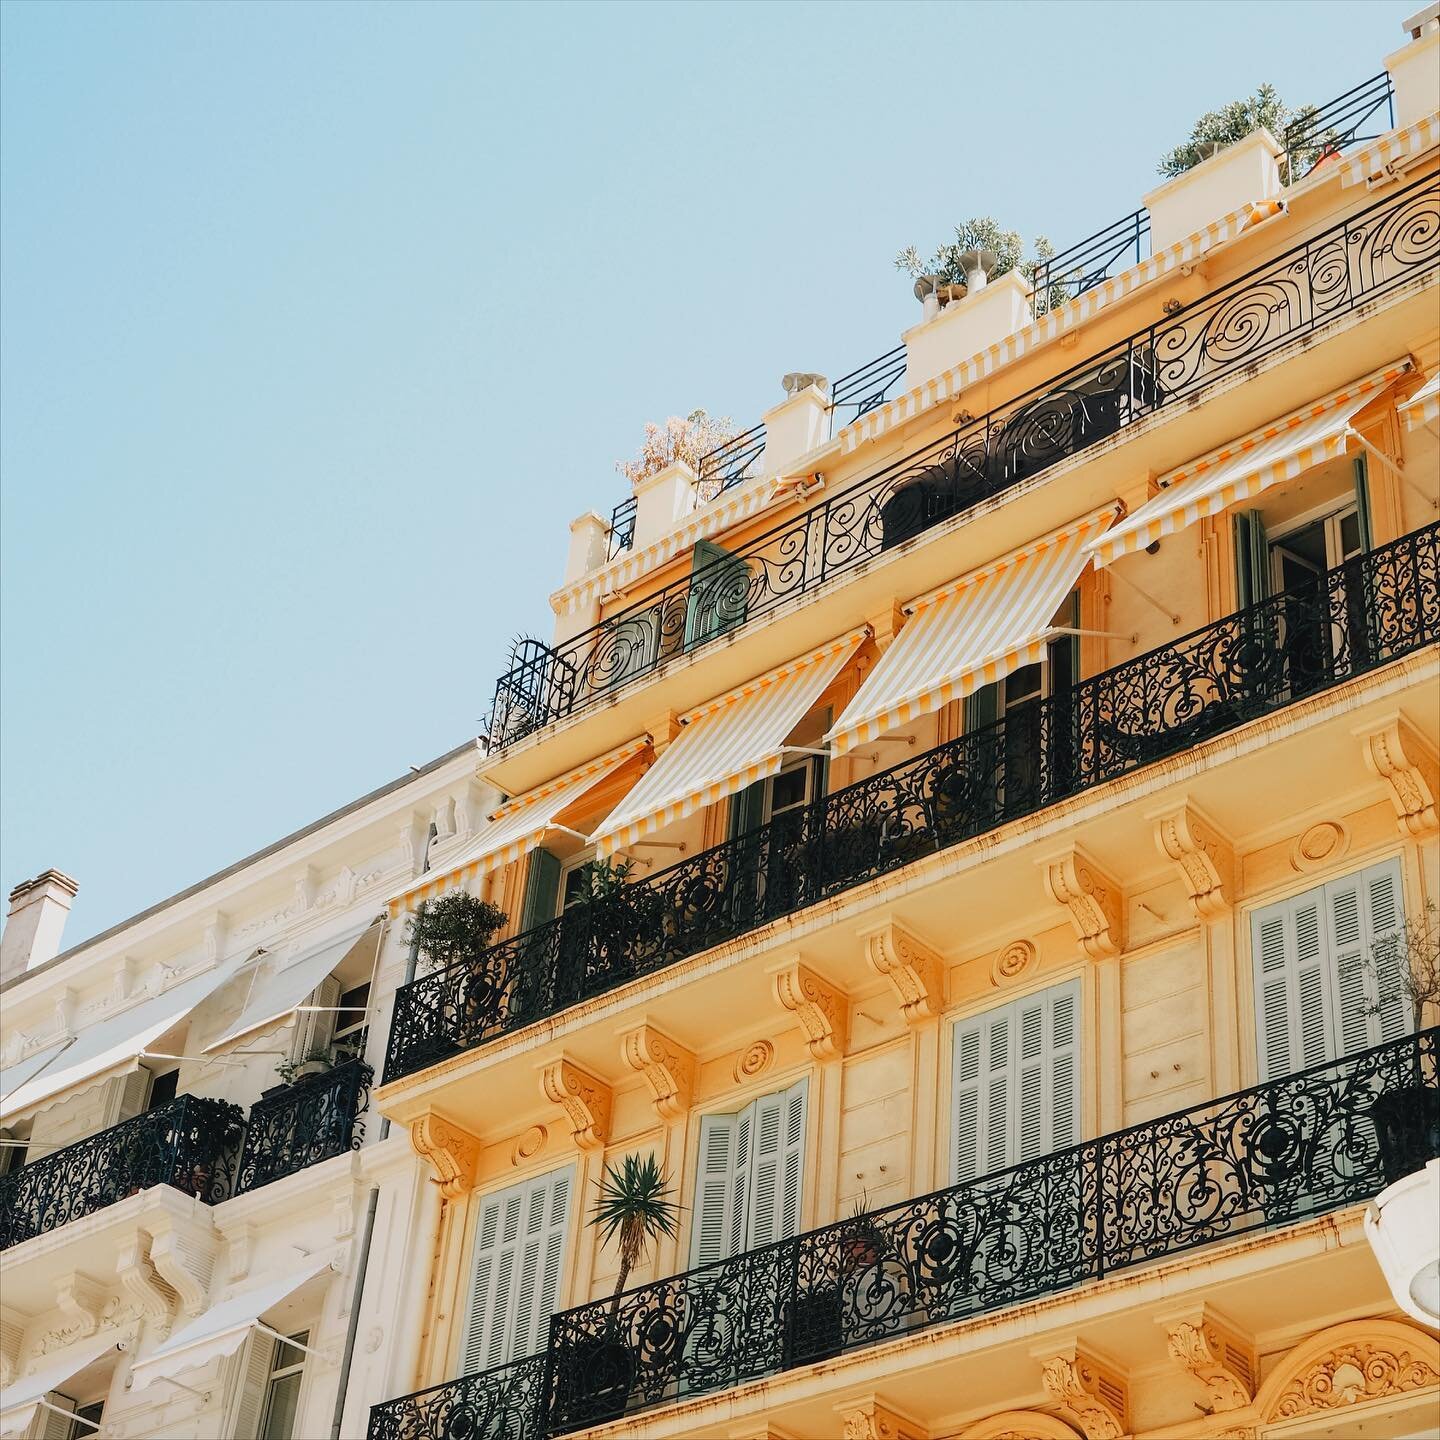 Timeless elegance meets azure charm: the essence of Cannes captured in its architectural fa&ccedil;ades. Ornate balconies and pastel shutters are your perfect invite to the C&ocirc;te d'Azur's dolce vita. 

&mdash;&mdash;&mdash;&mdash;&mdash;&mdash;
